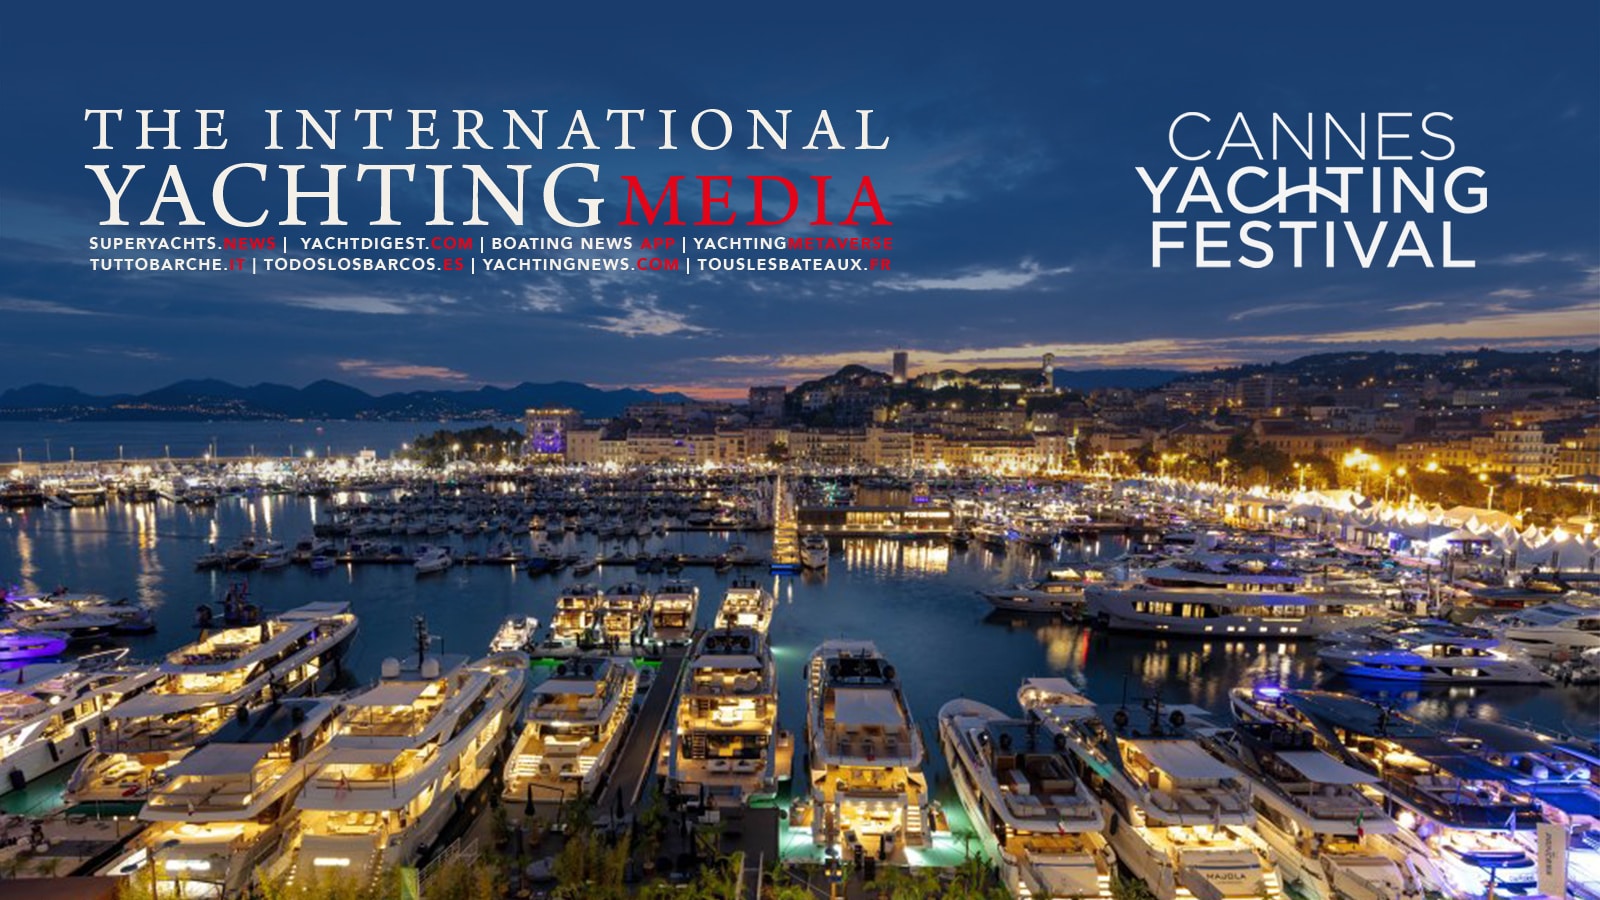 The International Yachting Media annuncia la partnership con il Cannes Yachting Festival 2023